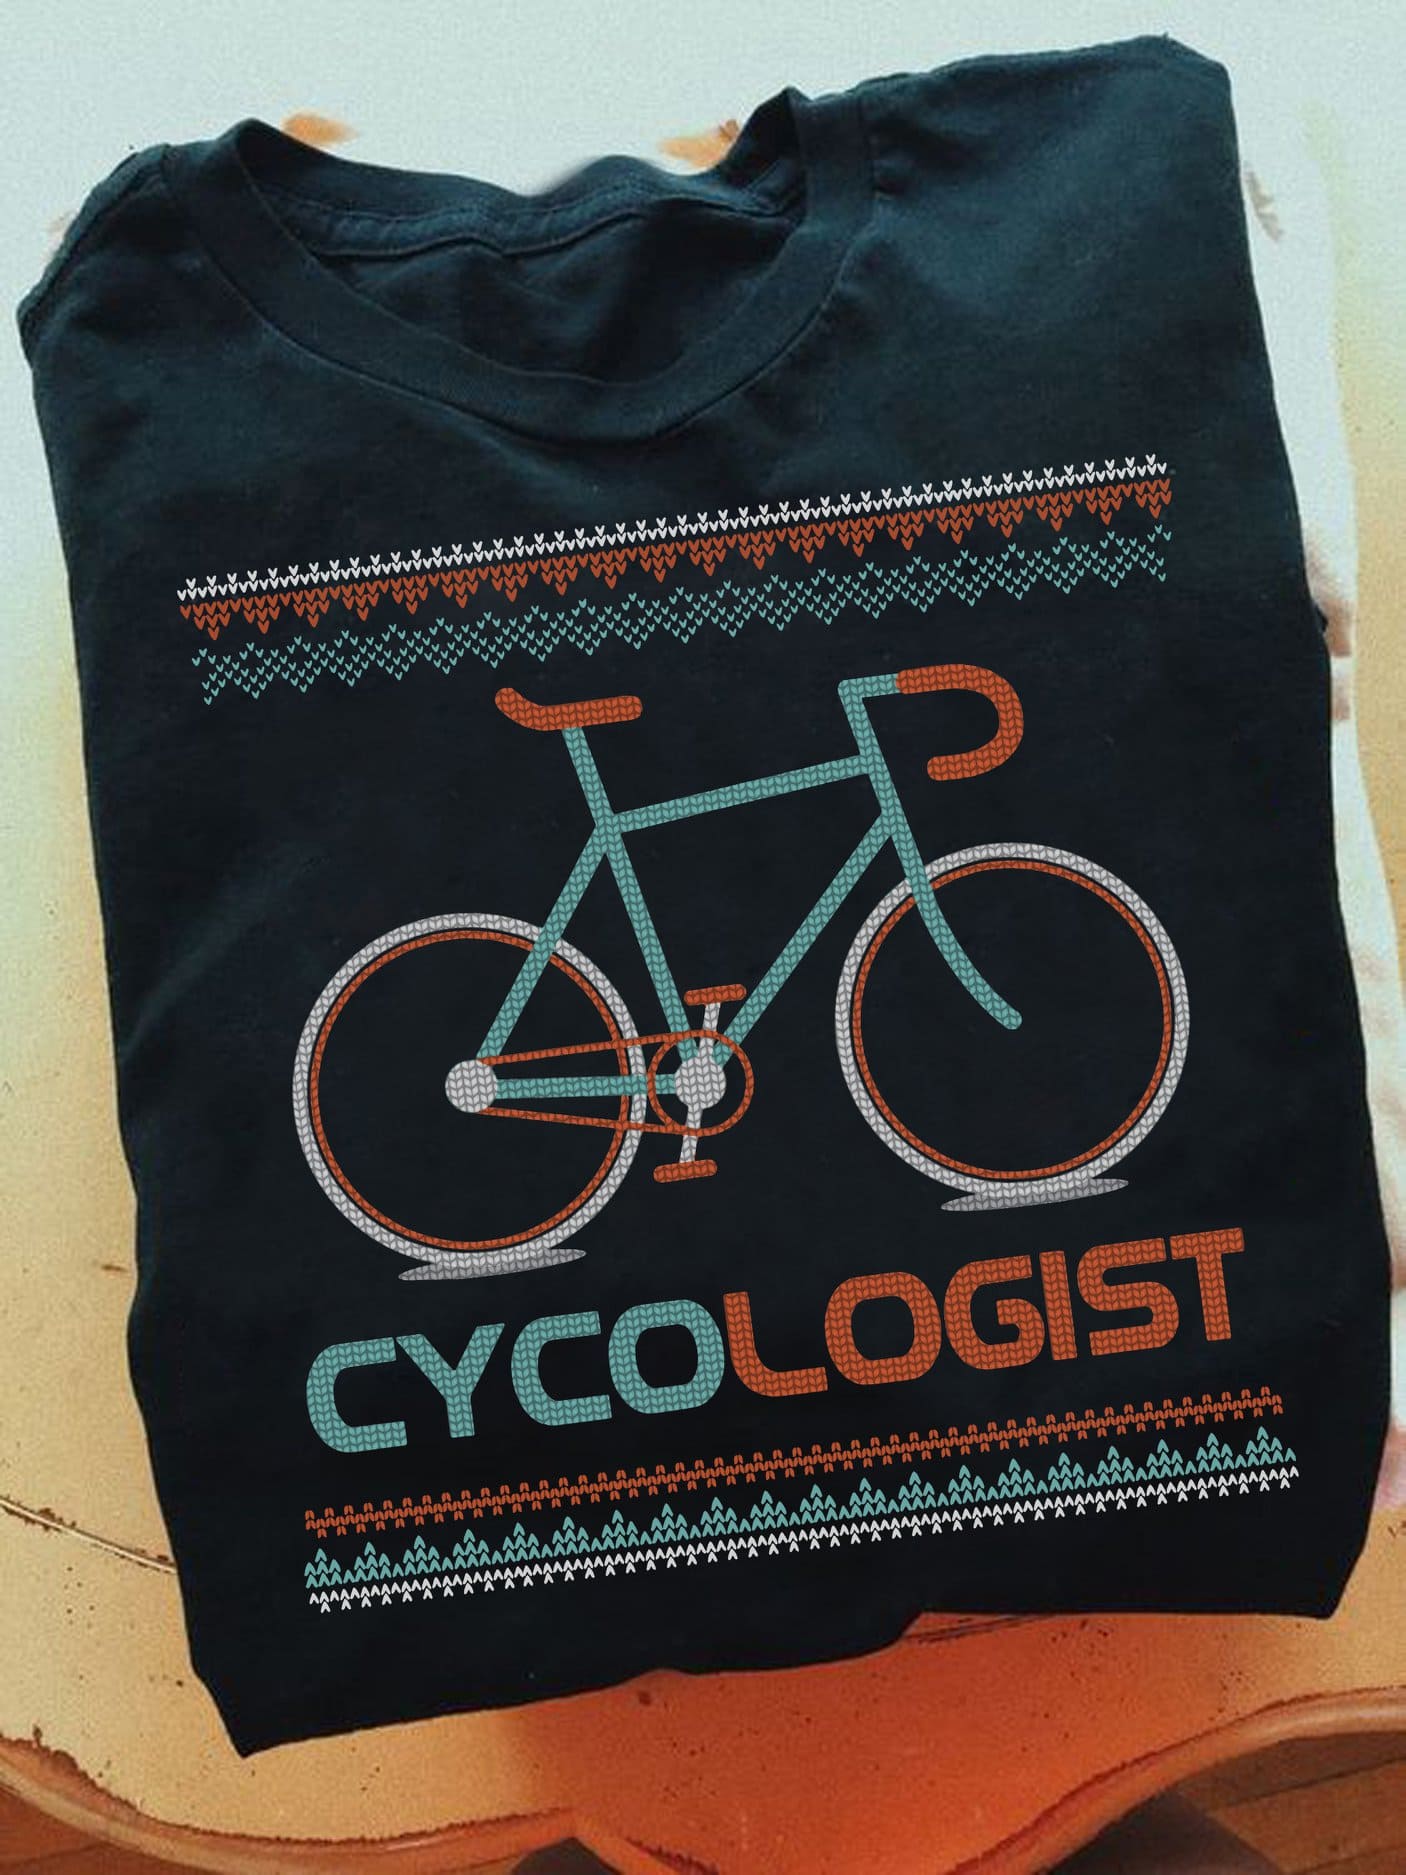 Cycologist T-shirt - Gift for cycling people, love to go cycling